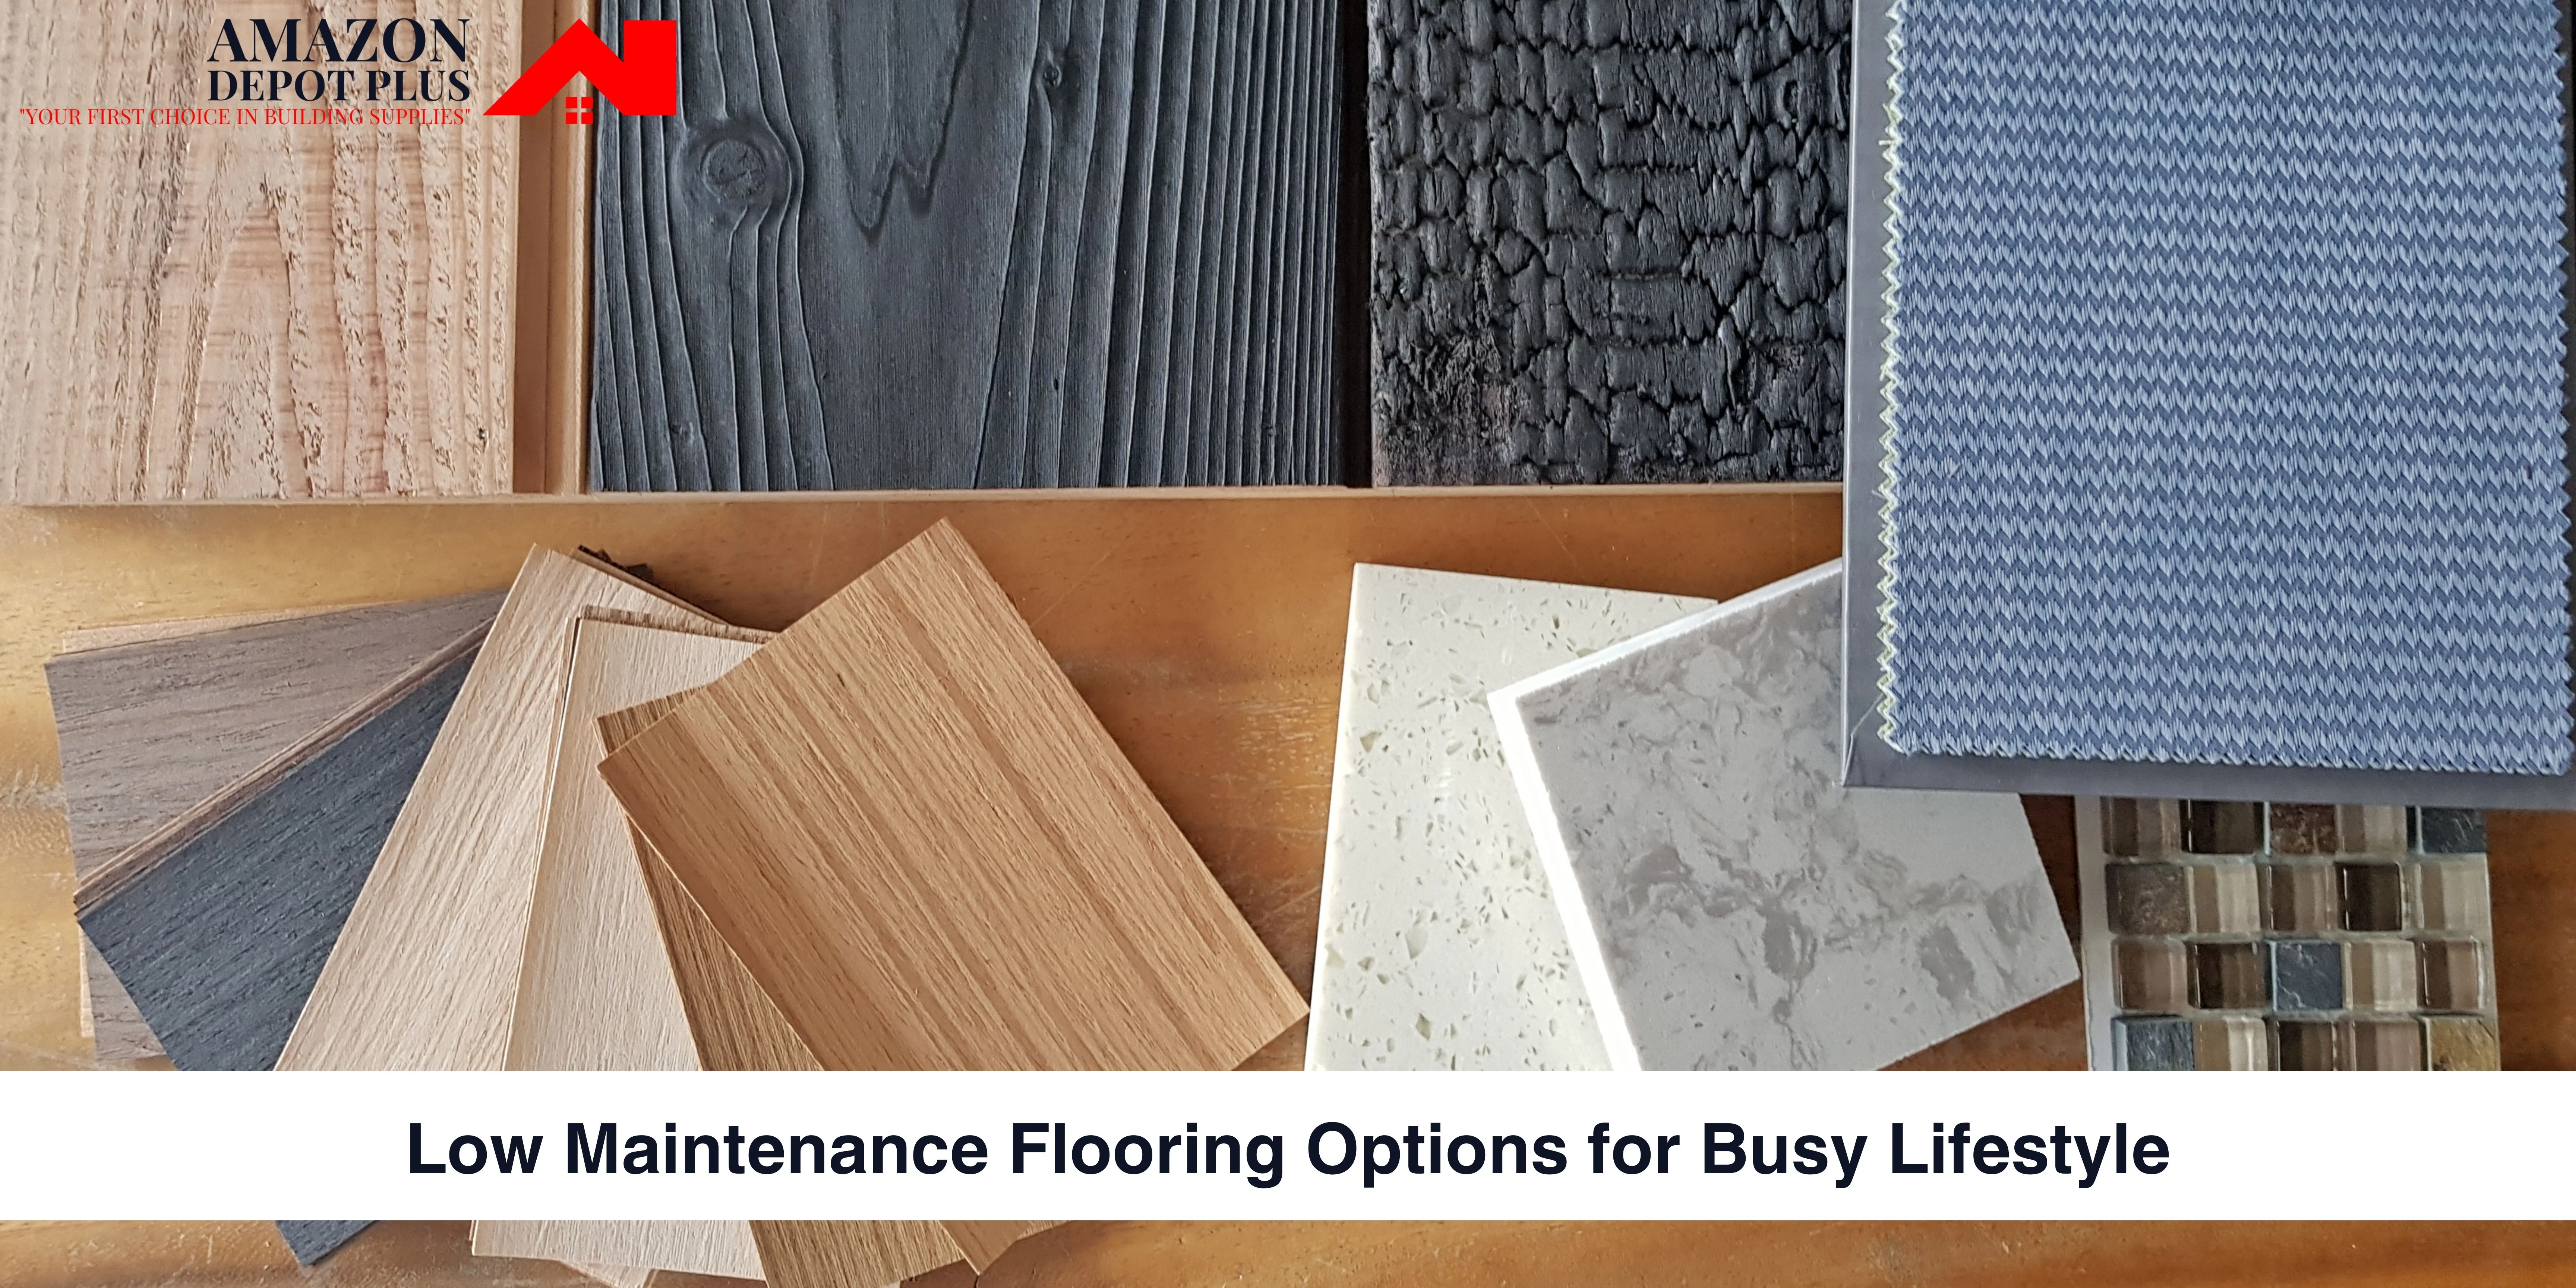 Low Maintenance Flooring Options for Busy Lifestyle